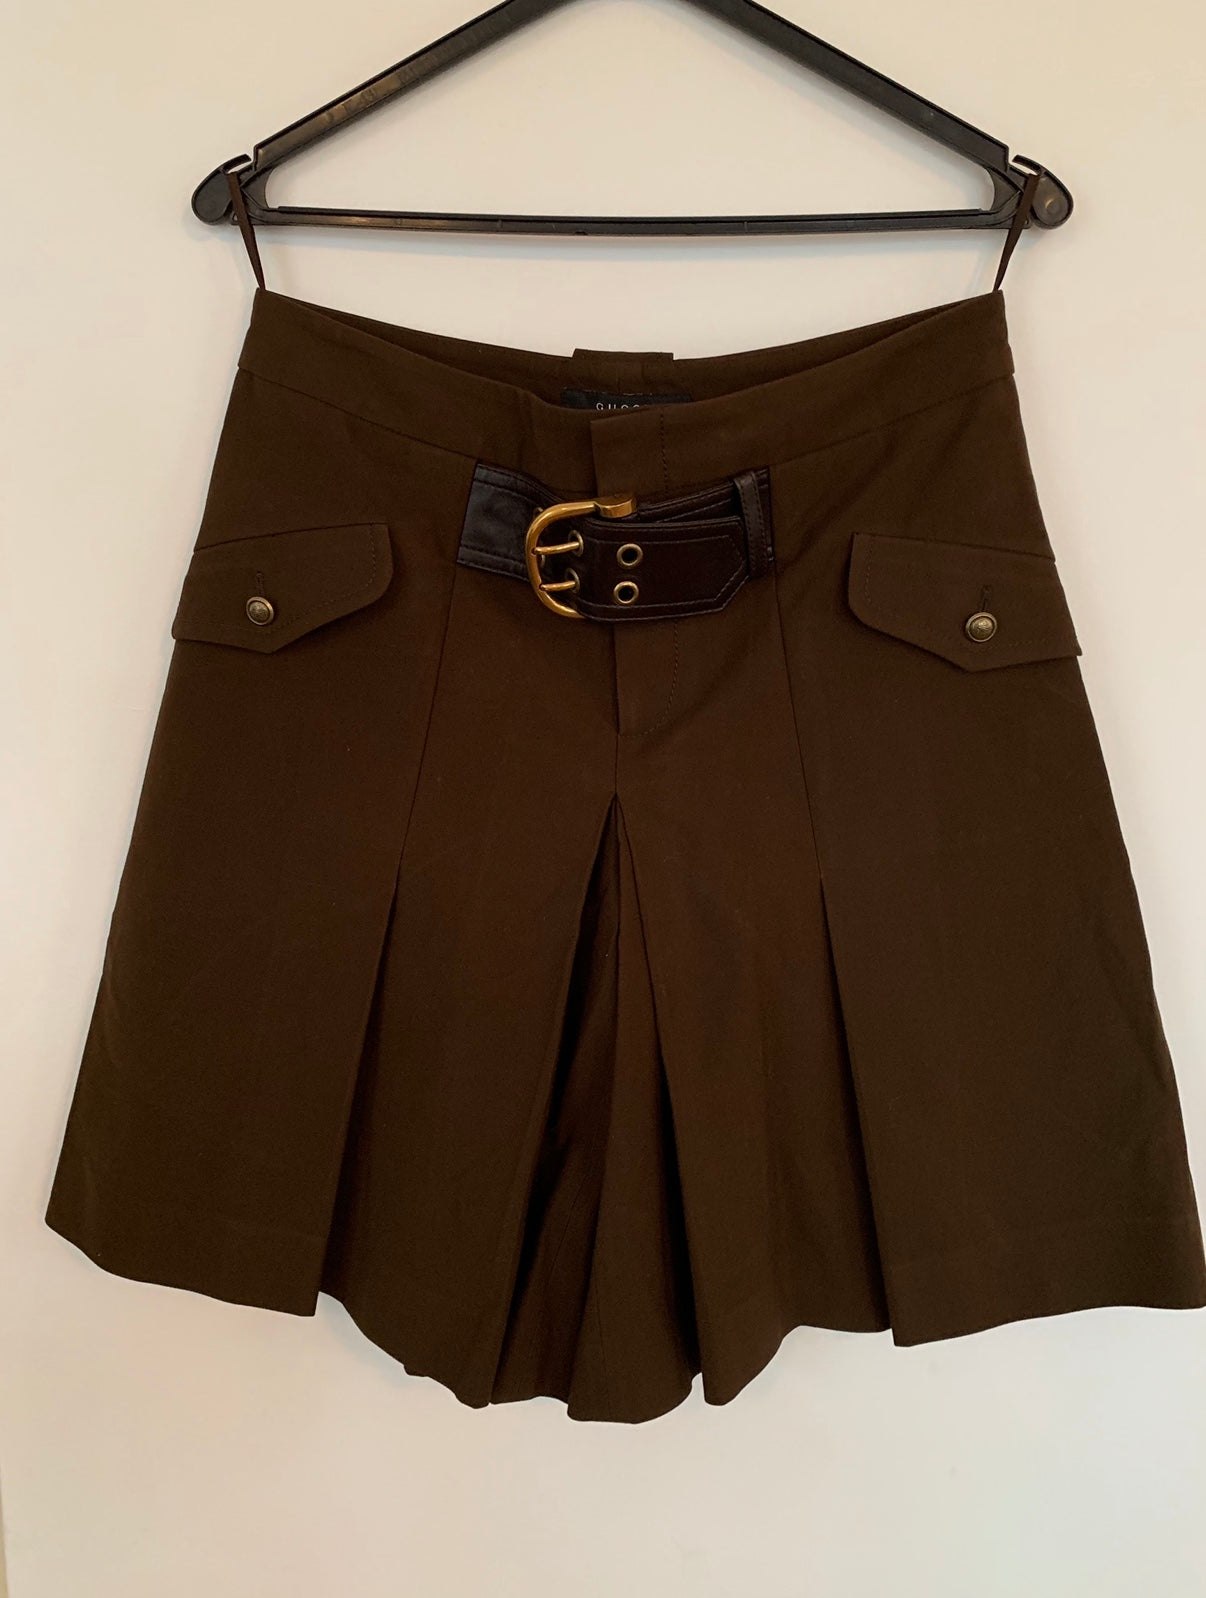 Gucci Skirt with built in belt and Gucci logo buttons